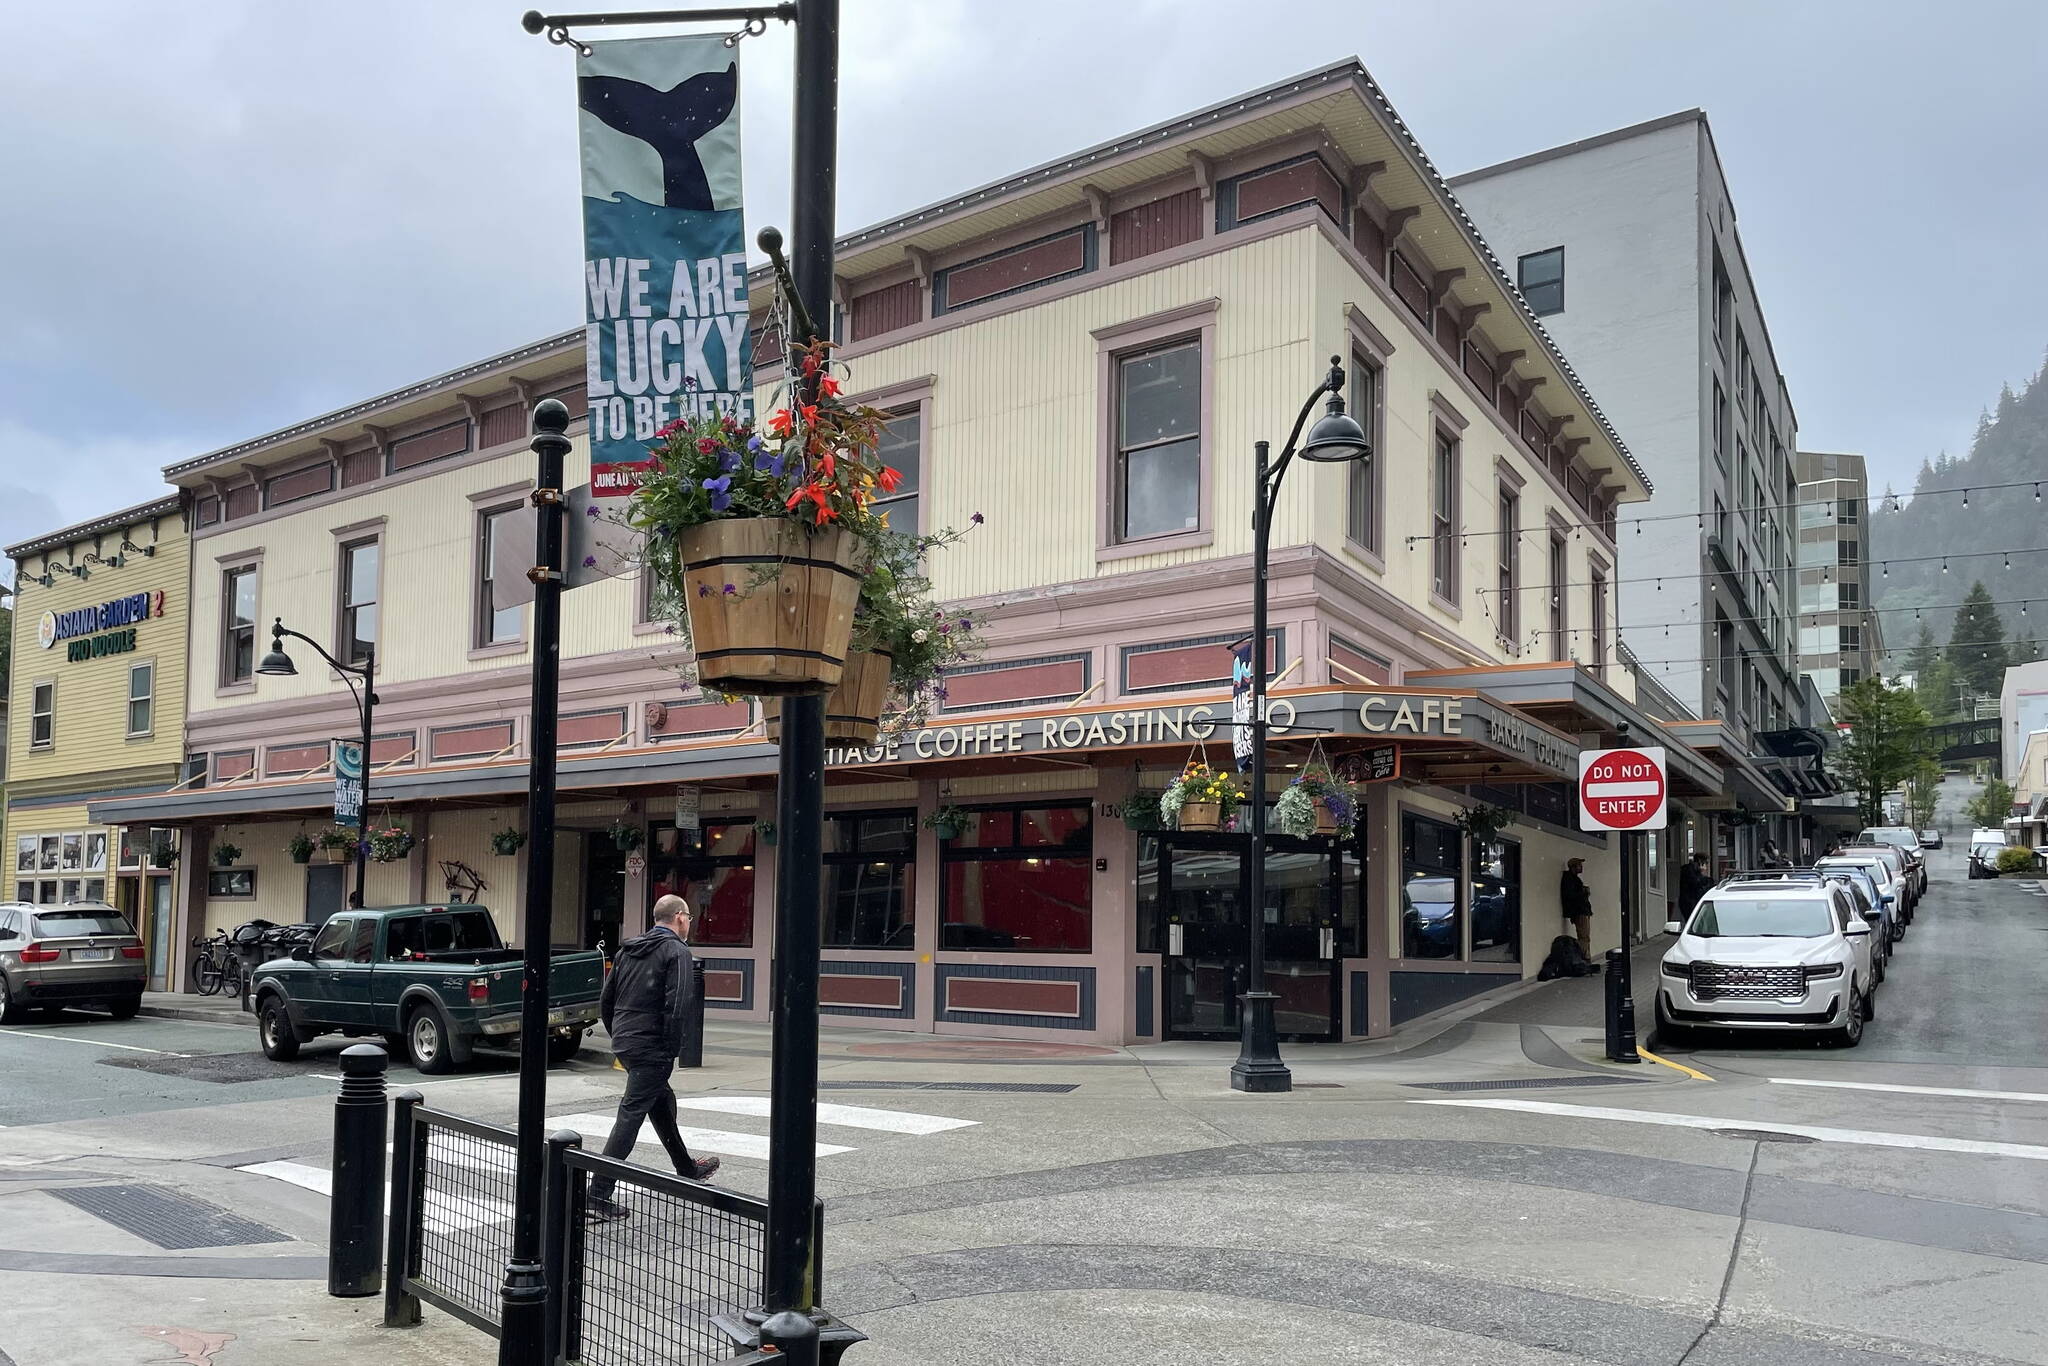 The 125-year-old building at the corner of Front and Seward as seen in summer of 2023. Juneau moved utilities underground and upgraded street lights in the mid-1980s and again recently. Each summer different sayings are displayed on colorful banners (“We are lucky to live here” on this banner) and flower baskets, bringing lively attention to downtown. (Photo by Laurie Craig)